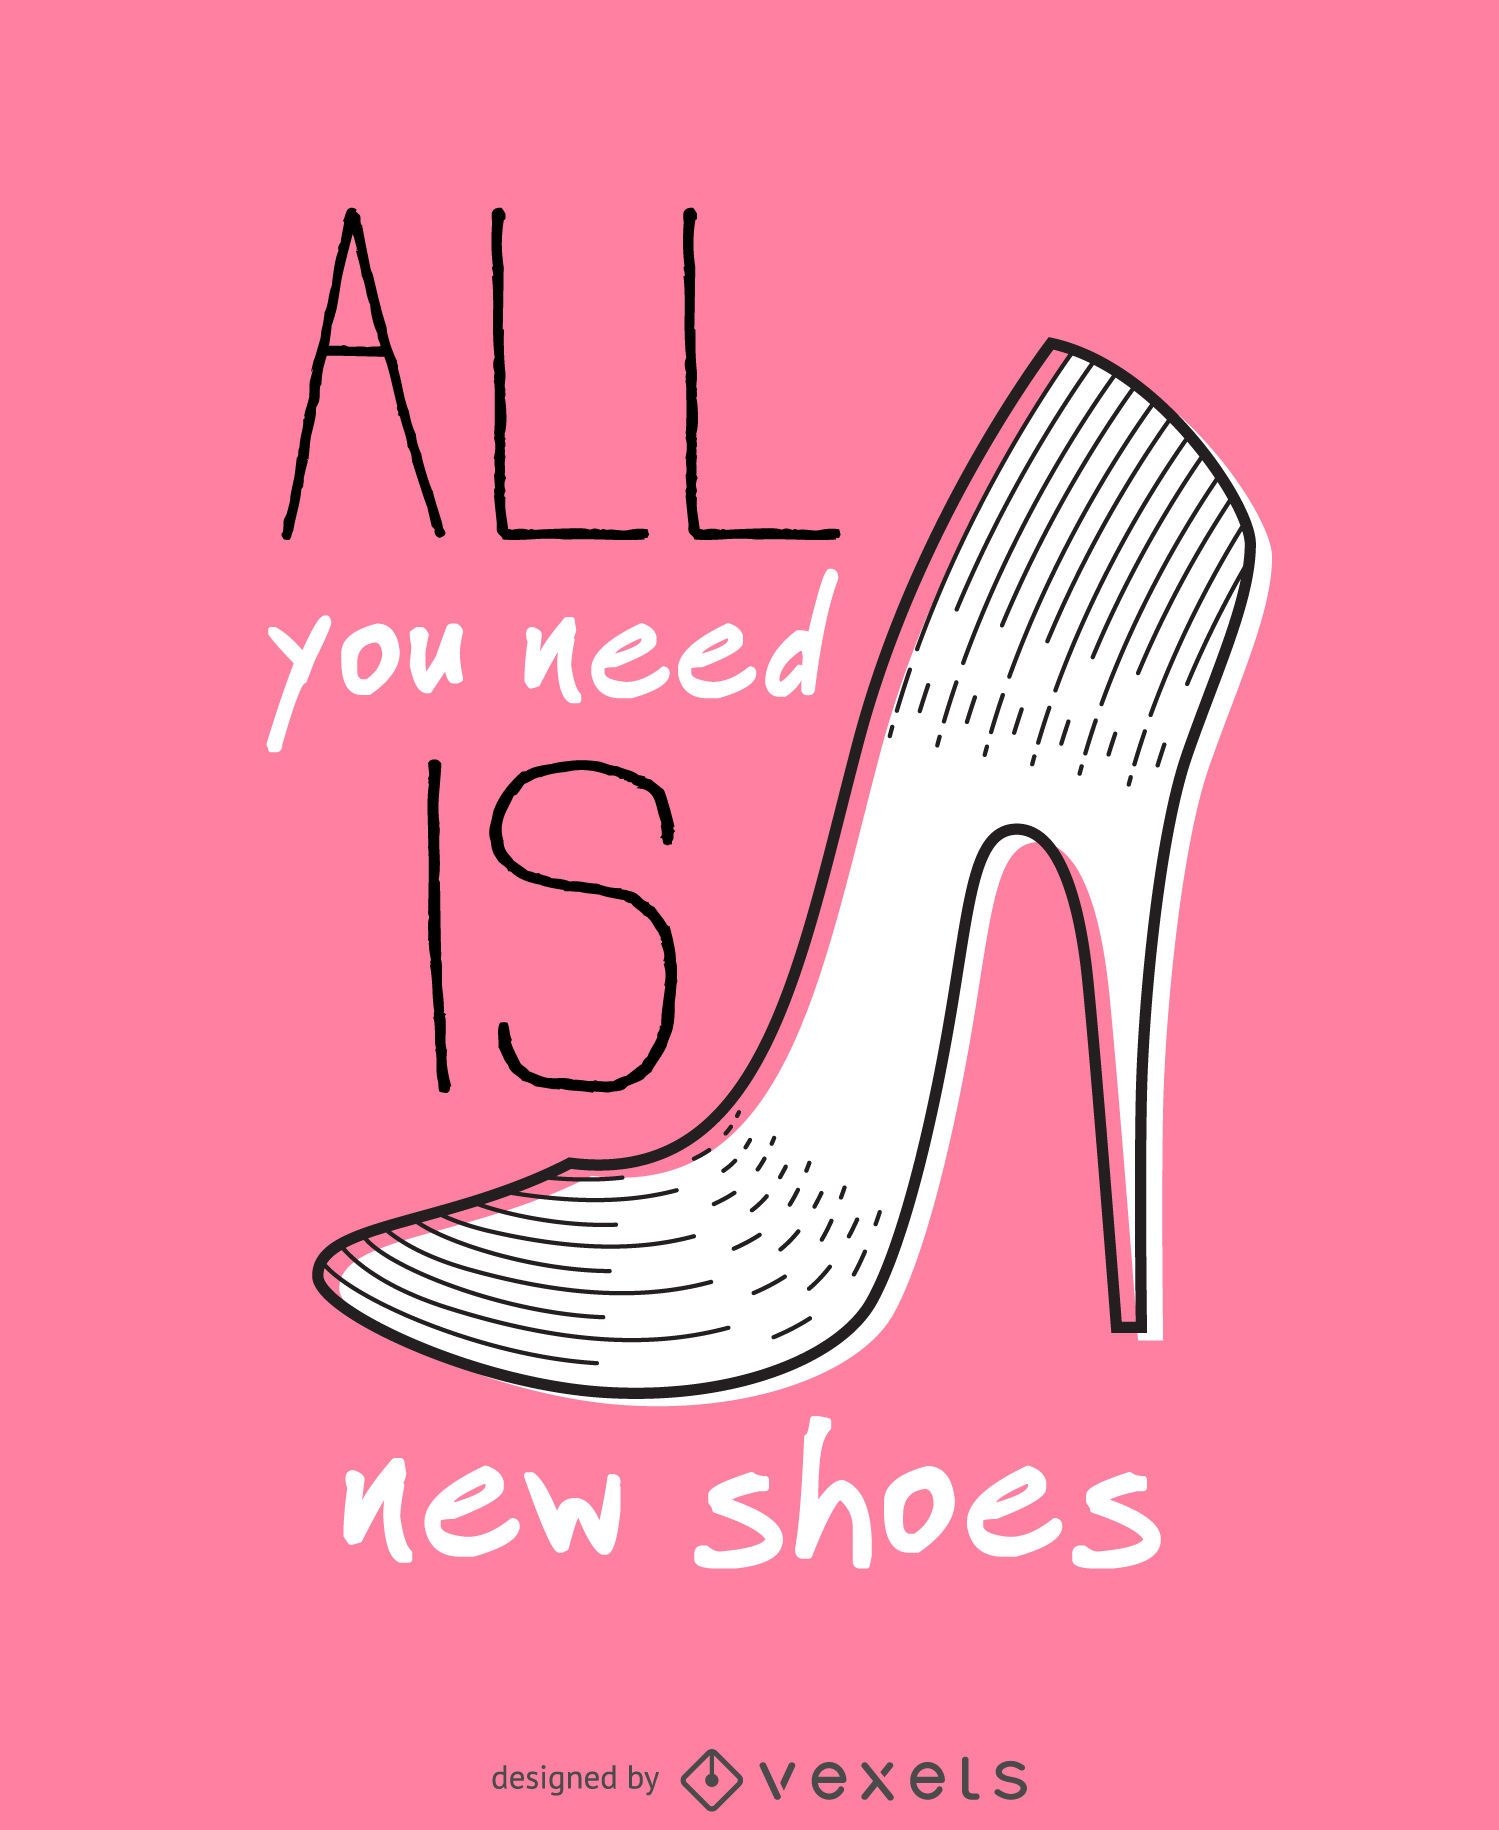 All you need is new shoes